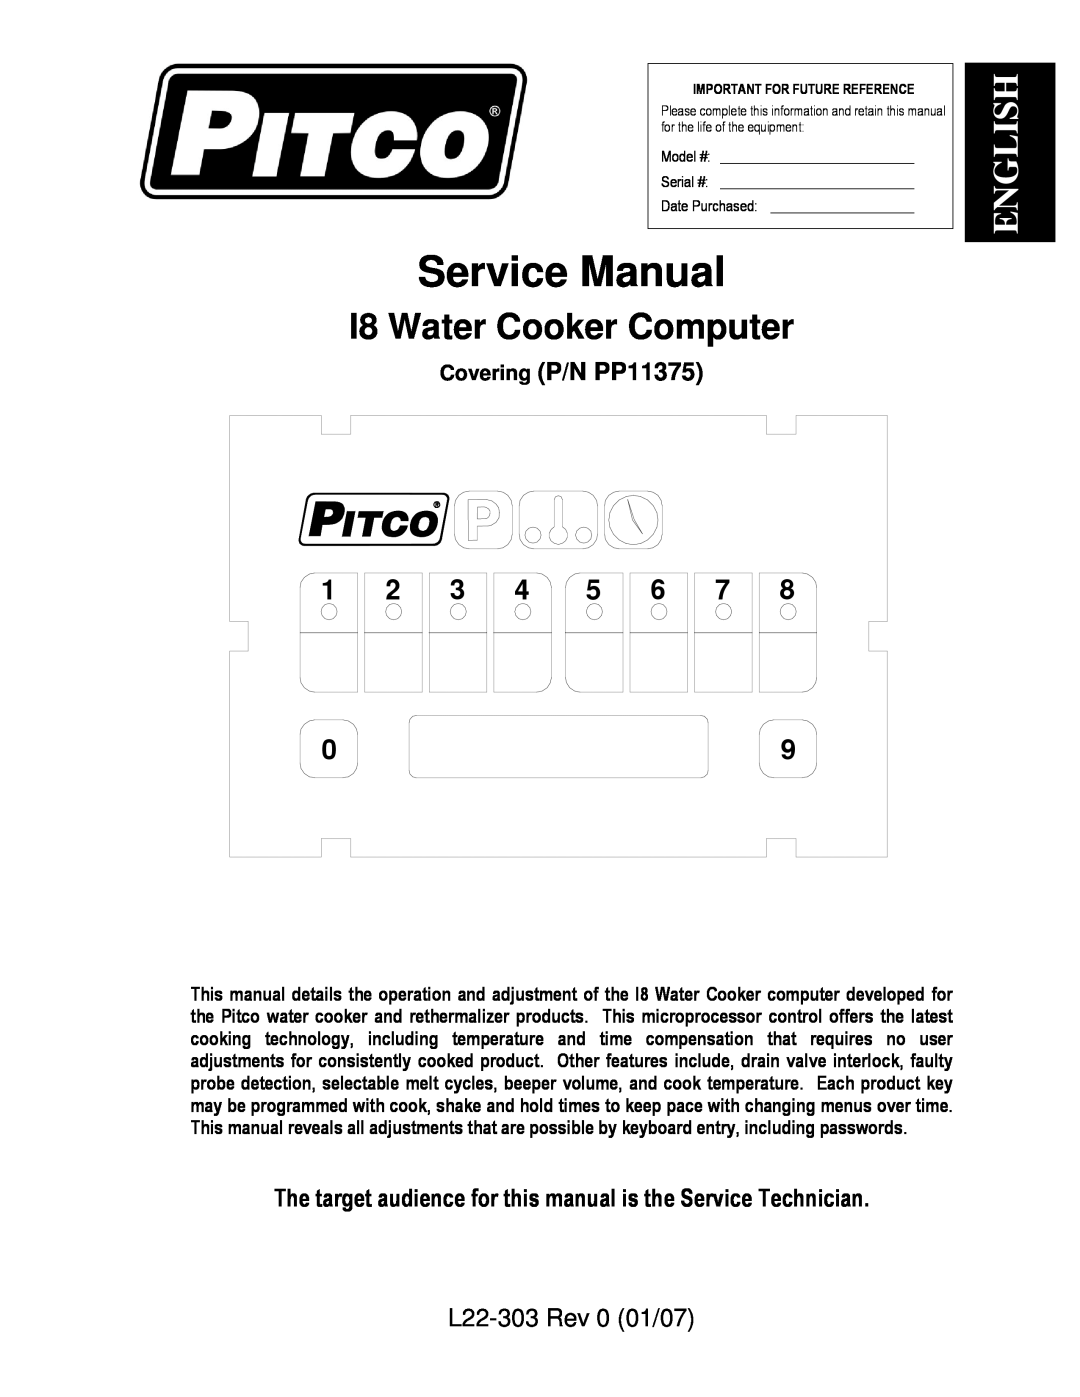 Pitco Frialator service manual L22-303Rev 0 01/07, I8 Water Cooker Computer, English, Covering P/N PP11375 